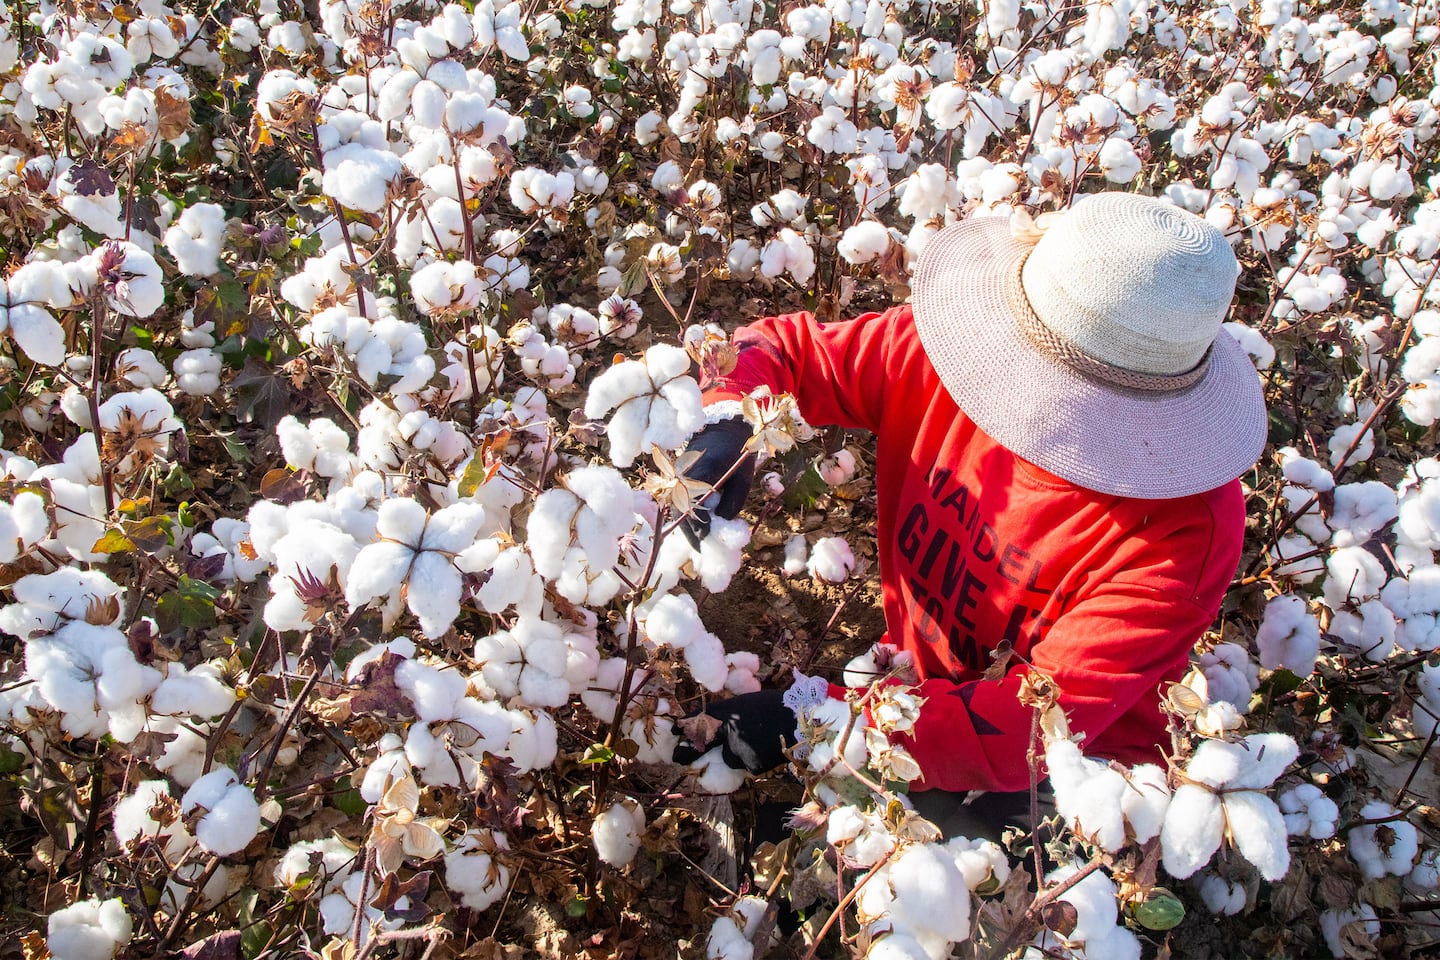 A farmer harvests cotton in Hami, Xinjiang Uighur autonomous region of China. Getty Images.